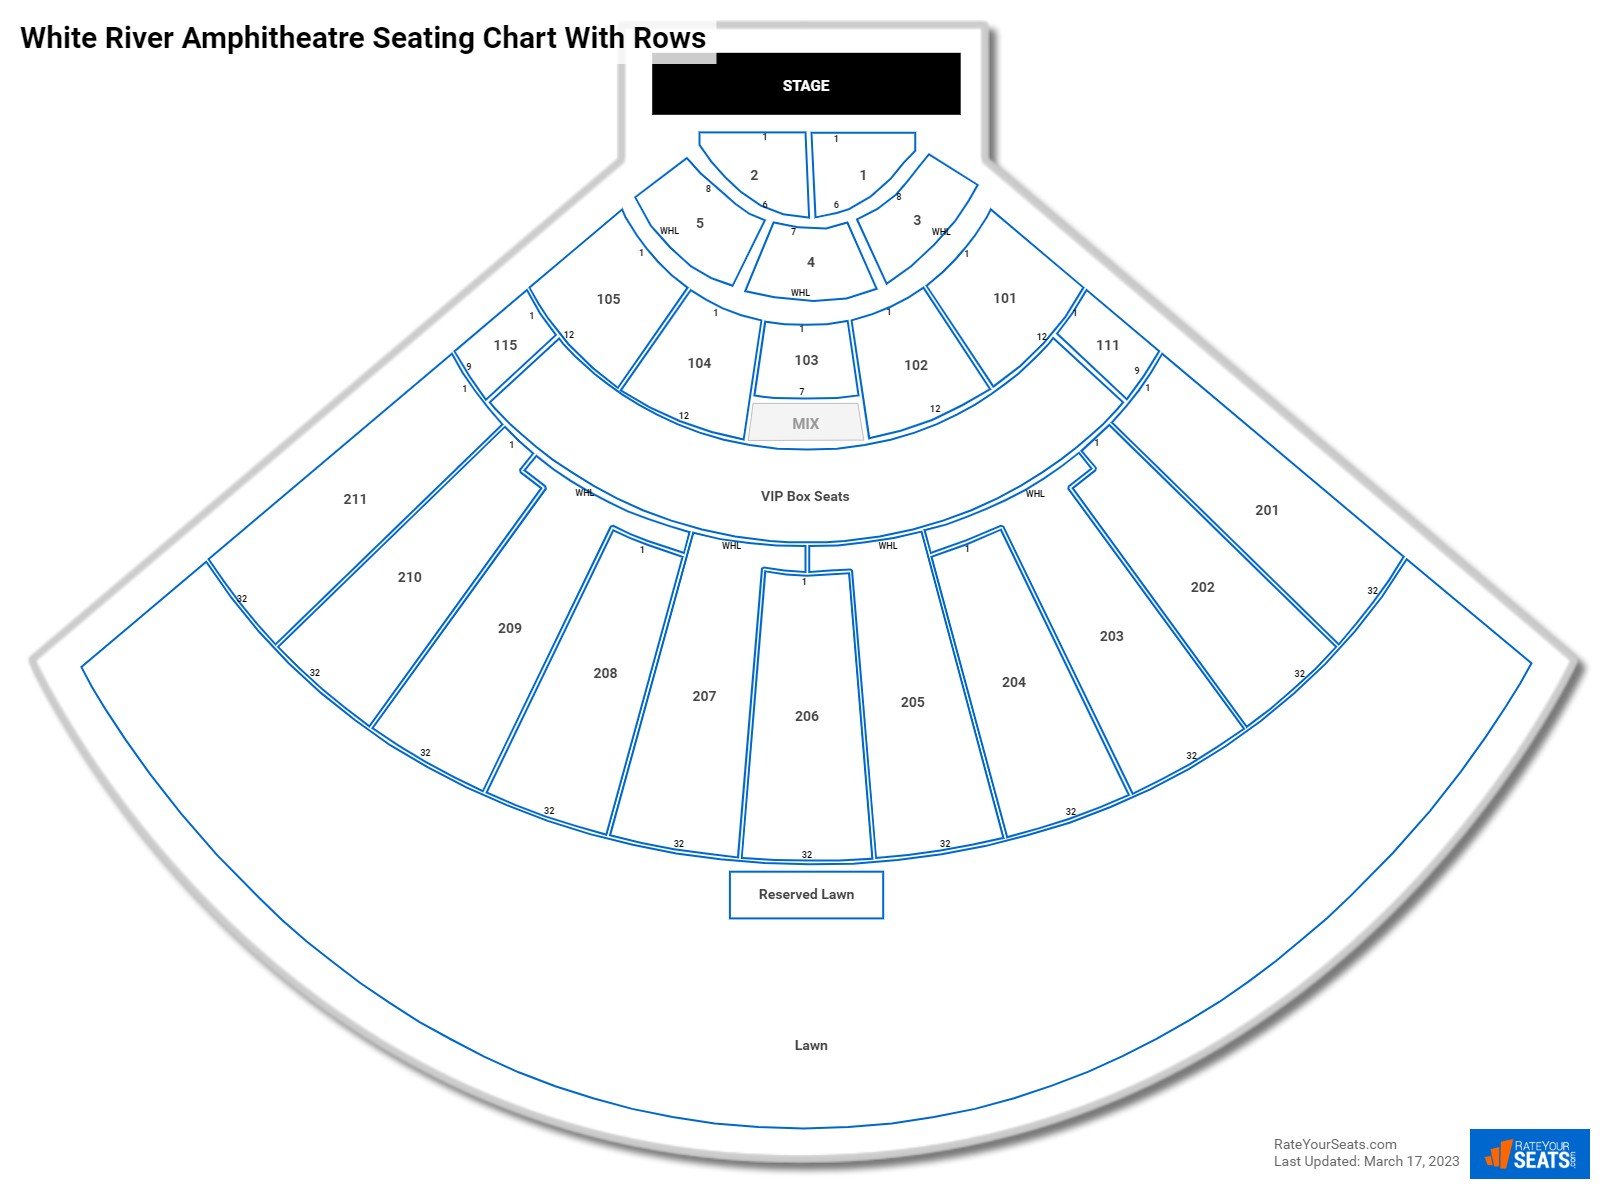 White River Amphitheatre seating chart with row numbers